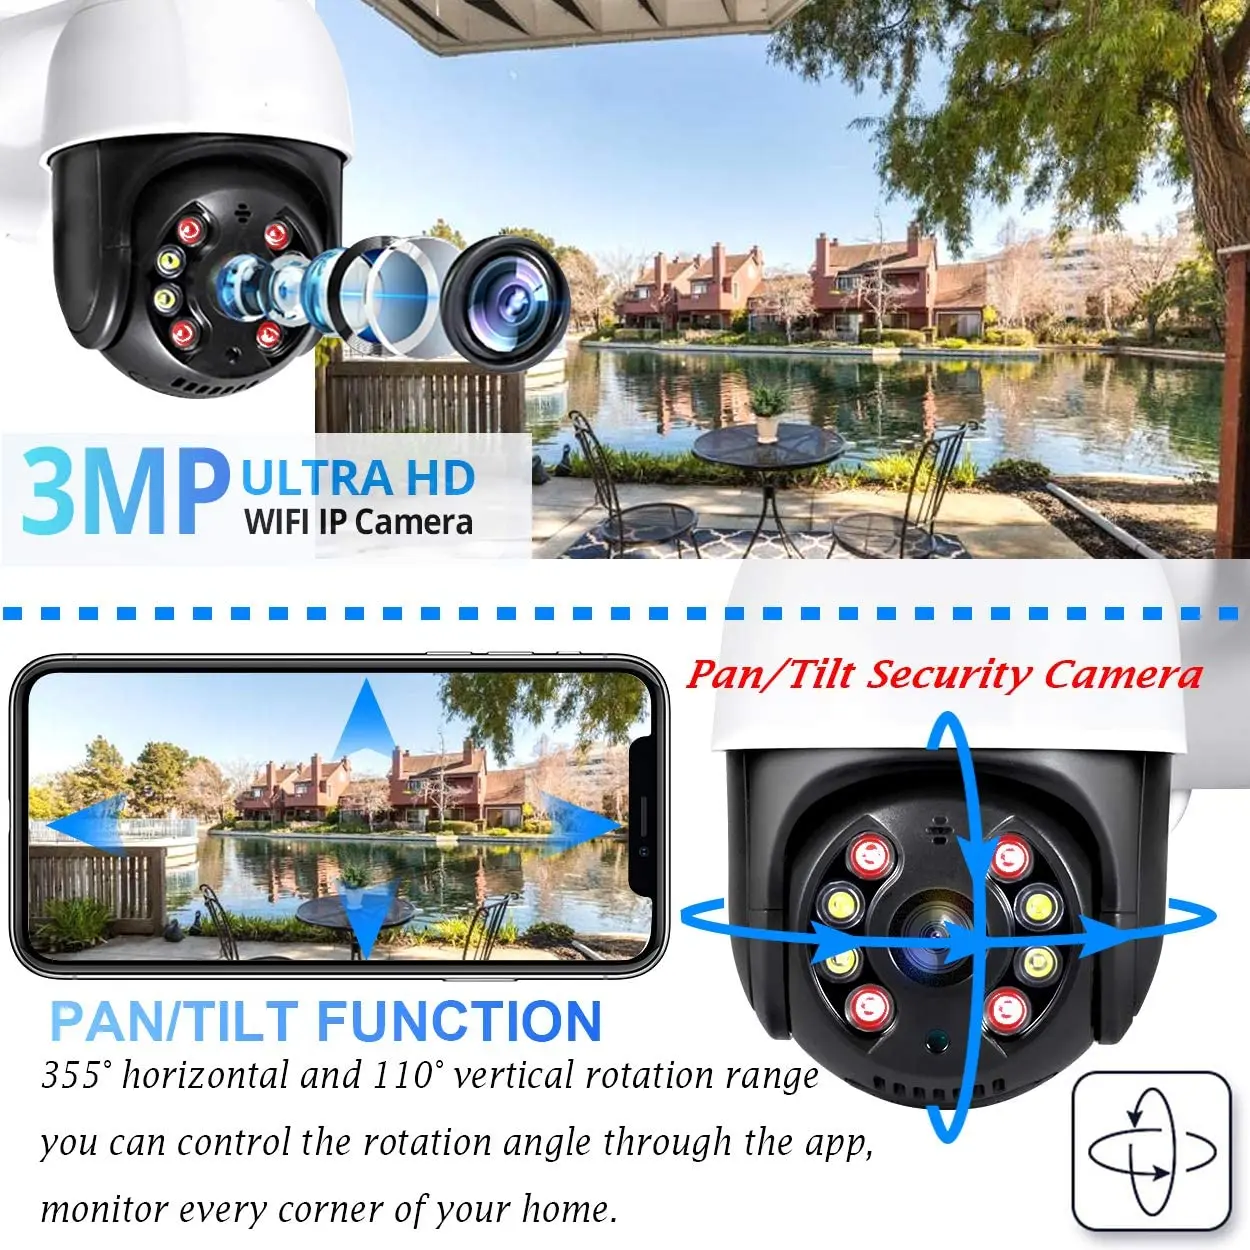 3mp ptz wifi camera ip outdoor ai human detect audio 1080p fhd ip camera color night vision wifi security cctv camera v380 pro free global shipping